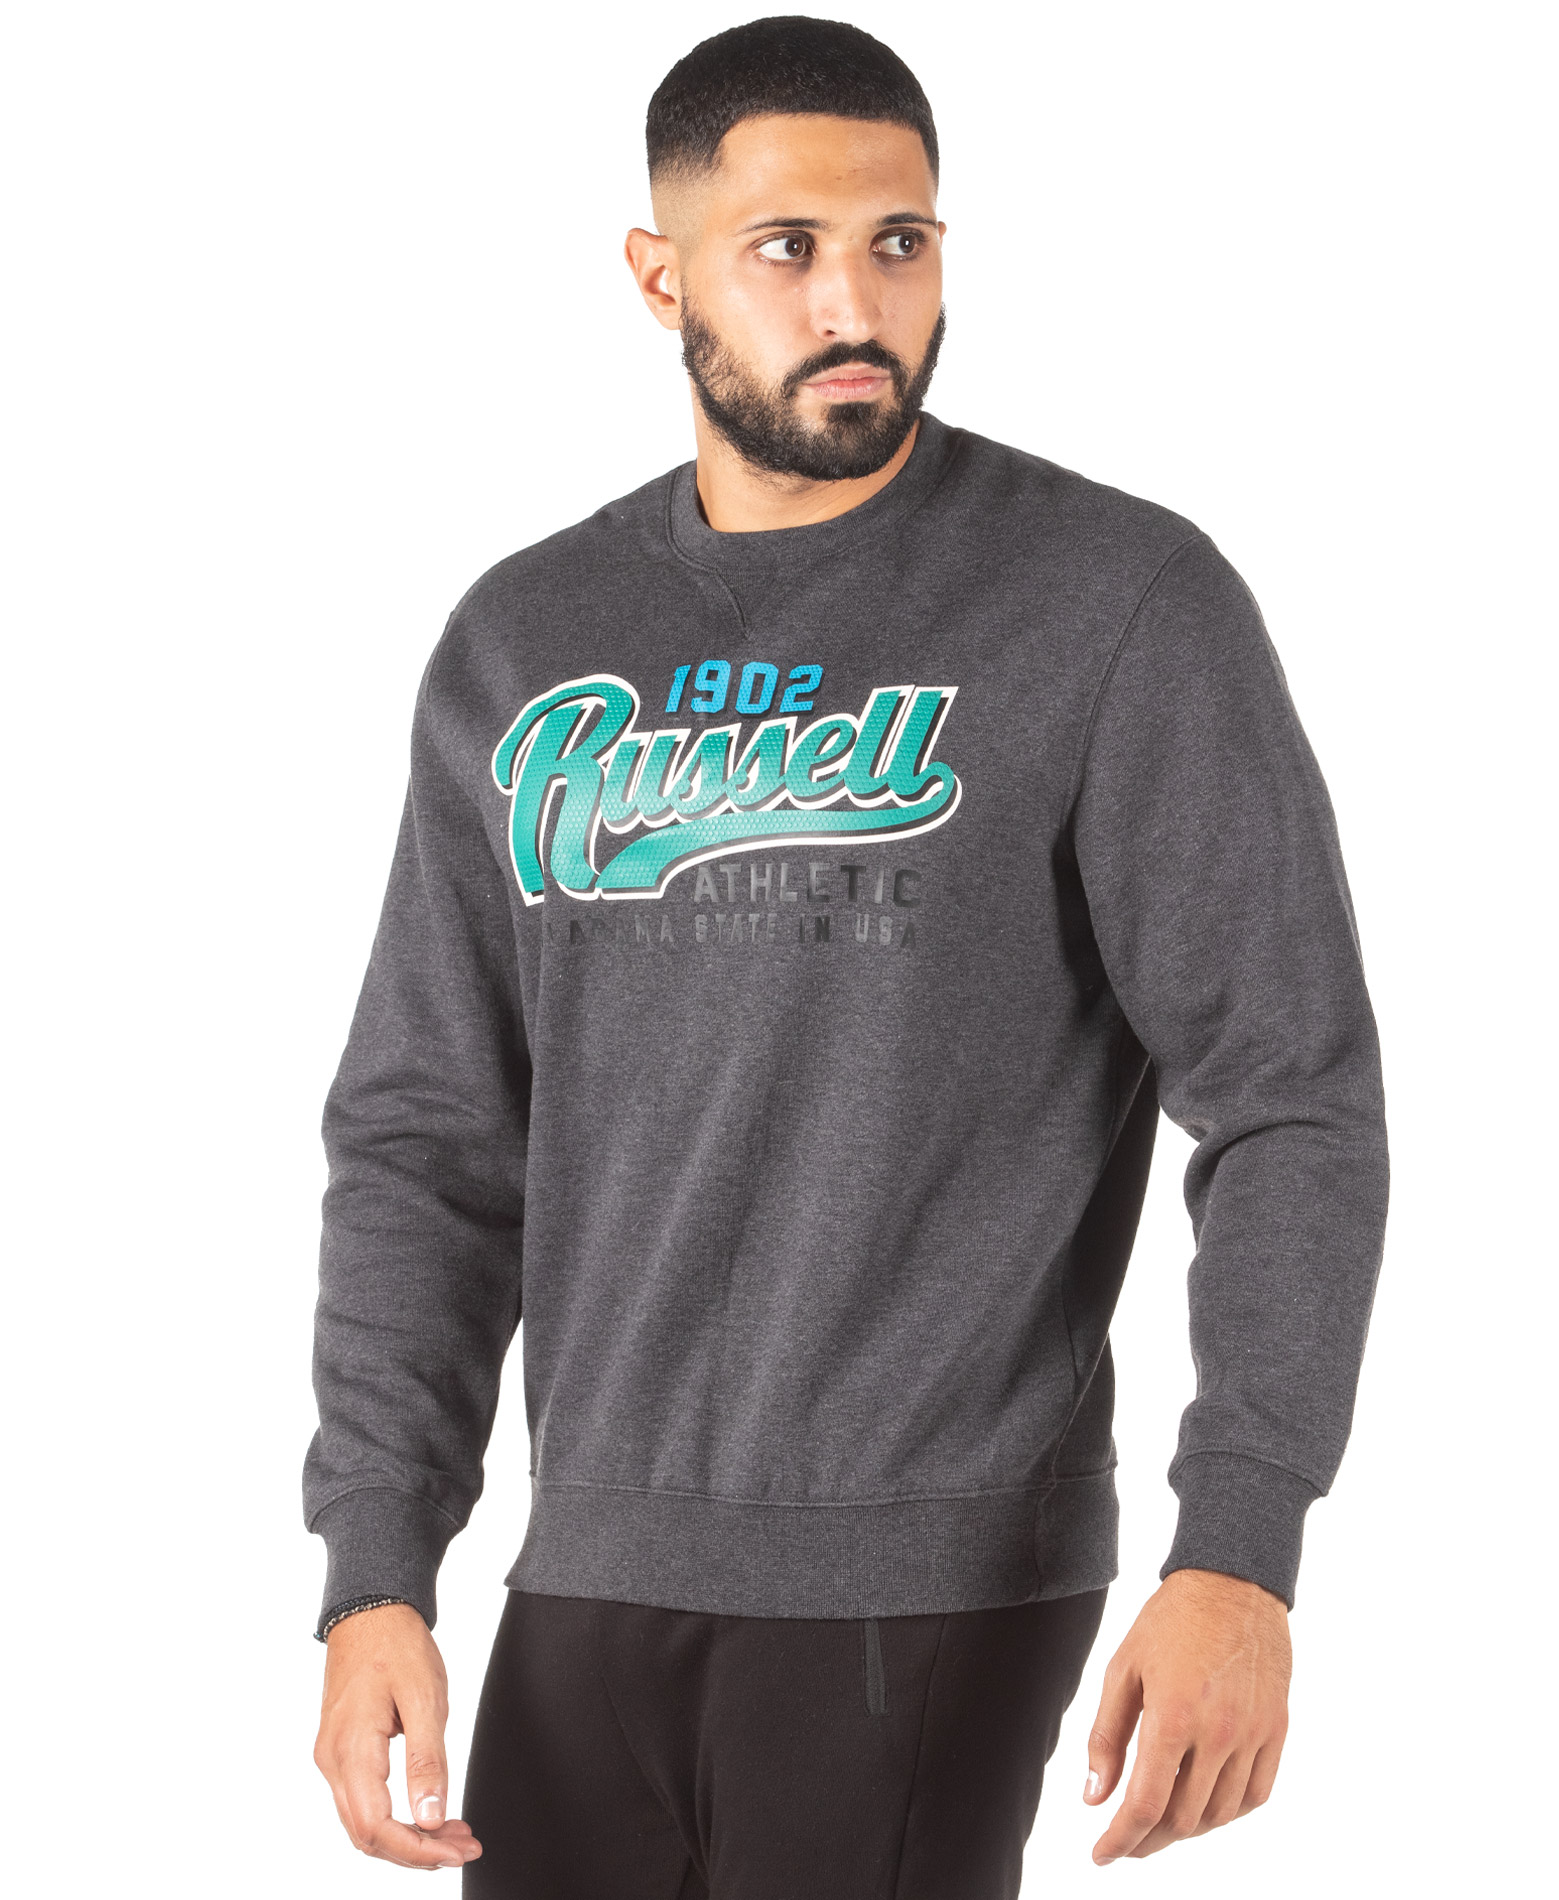 Russell Athletic 1902 - CREWNECK SWEAT SHIRT A0-057-2-098 Ανθρακί